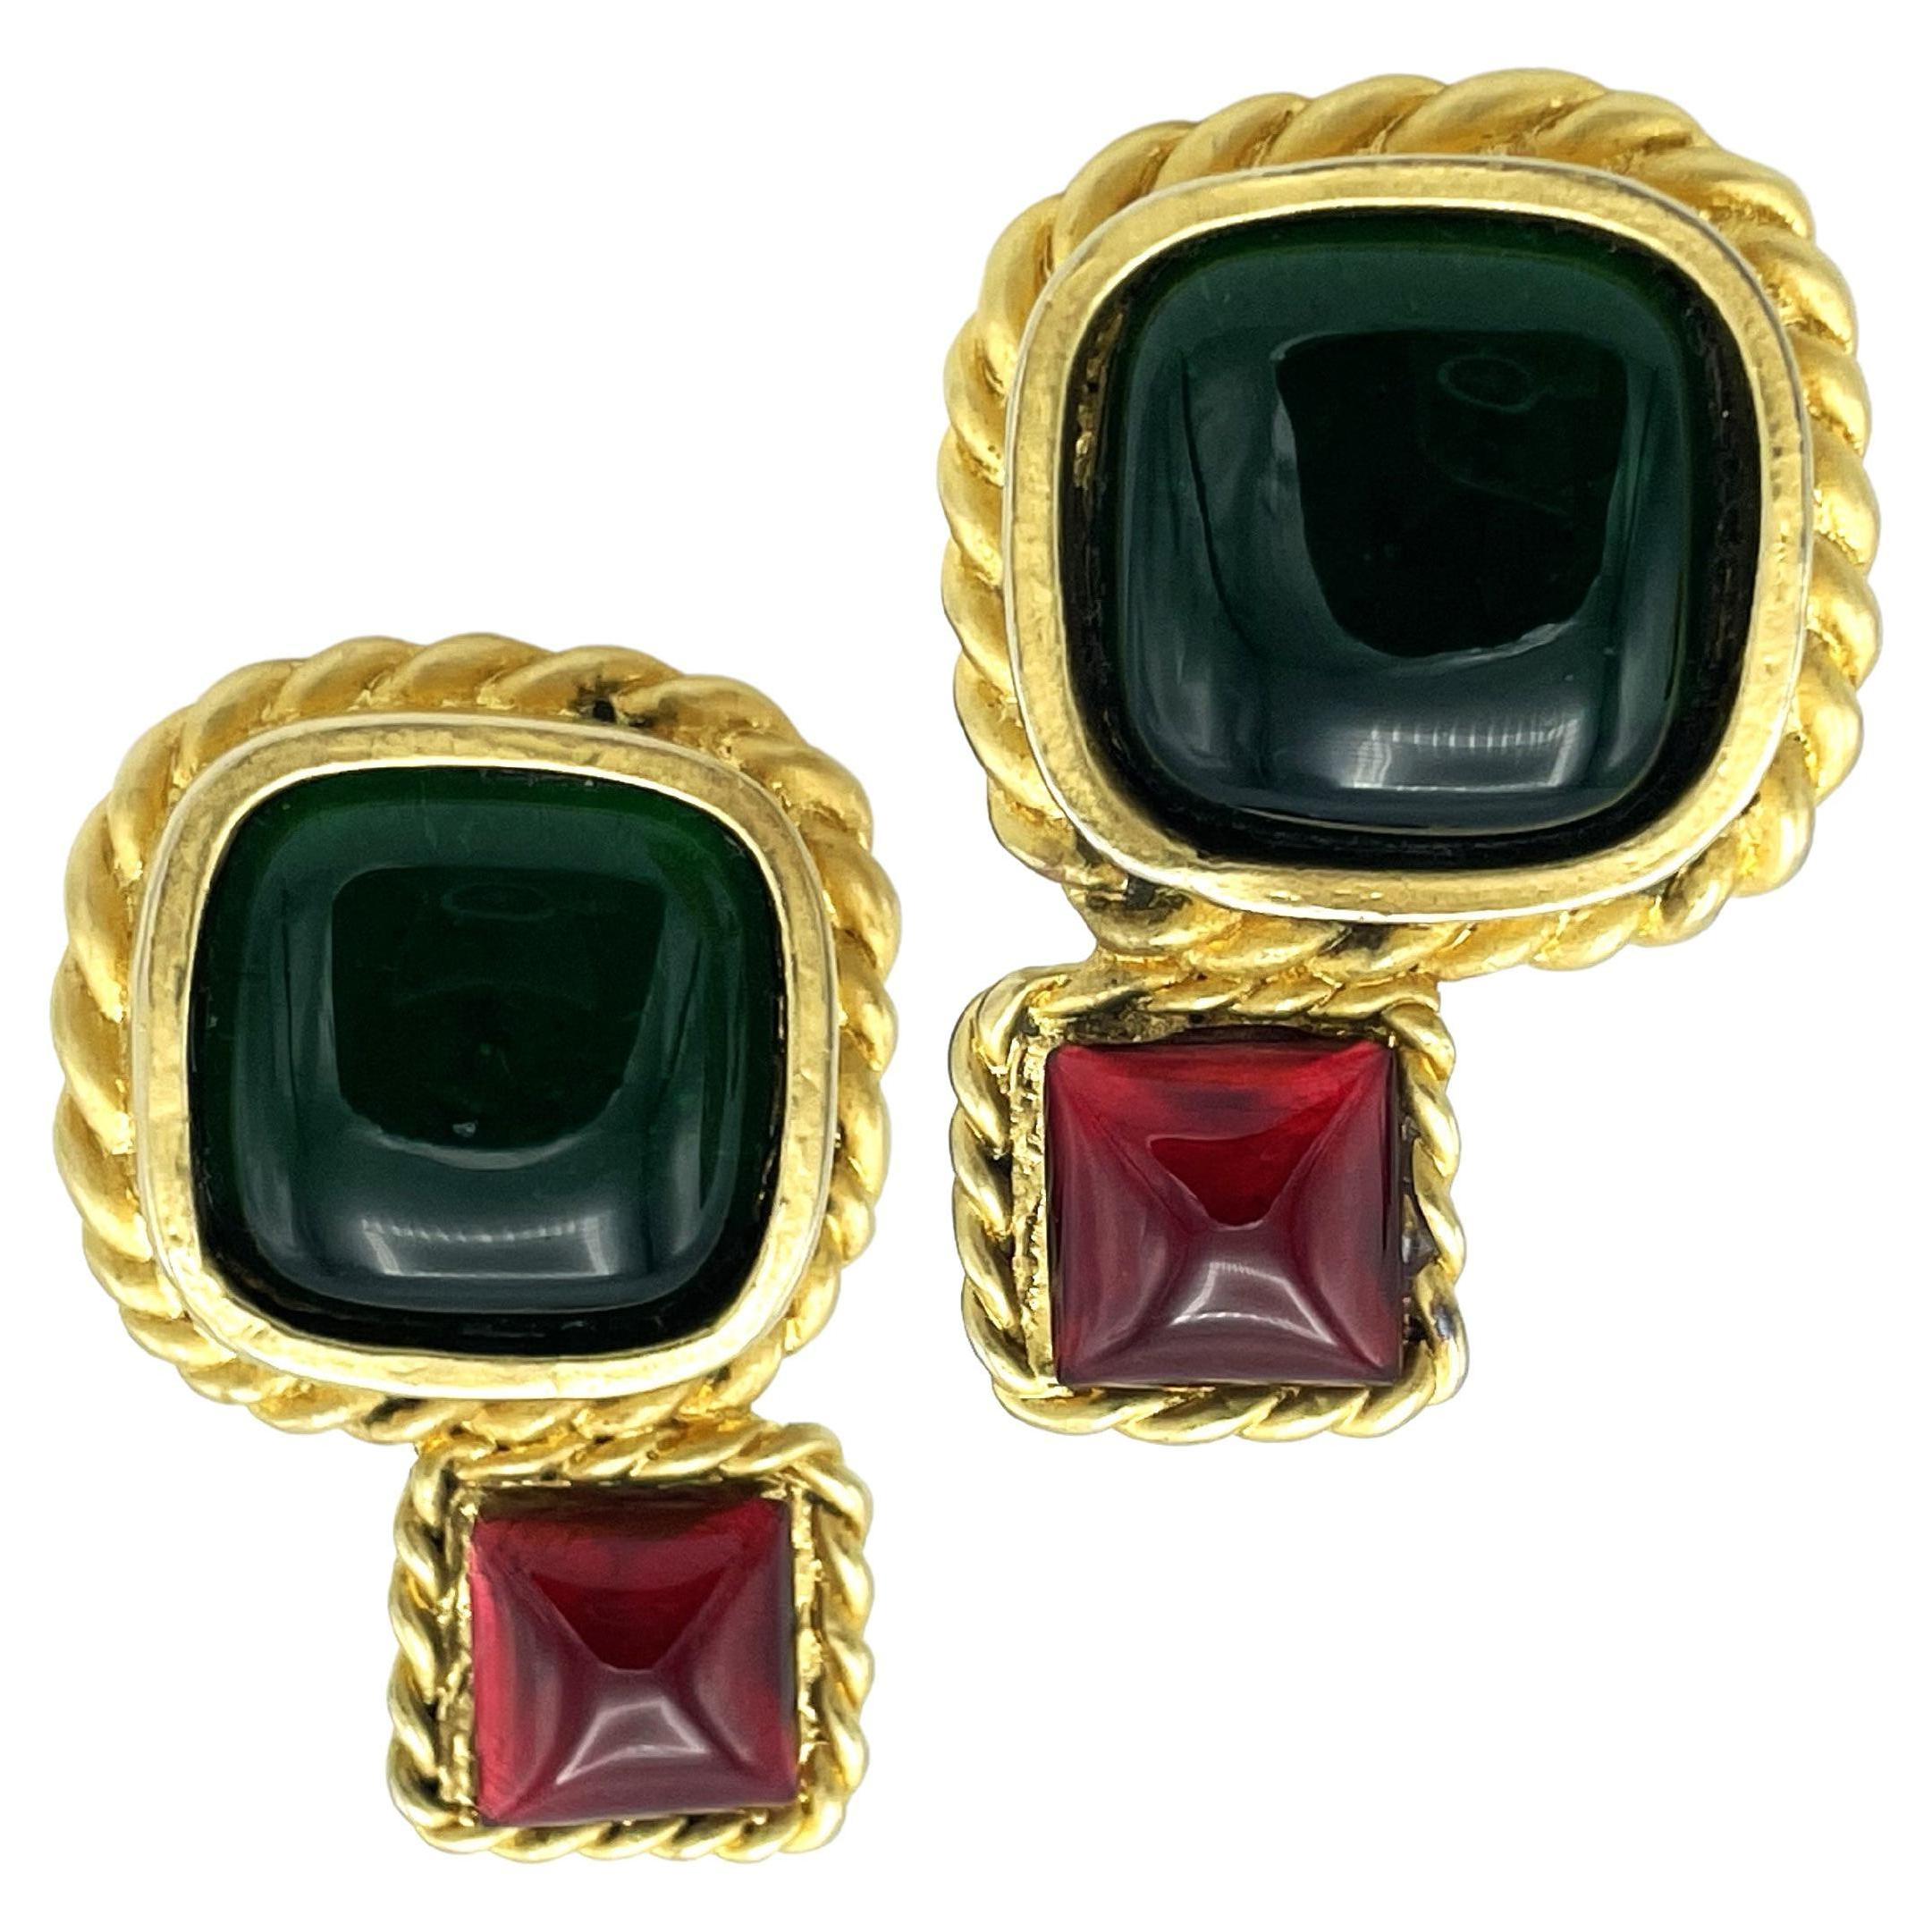 ICONIC CHANEL CLIP-ON EARRING green and red poured glass by Gripoix, Resin 1990s For Sale